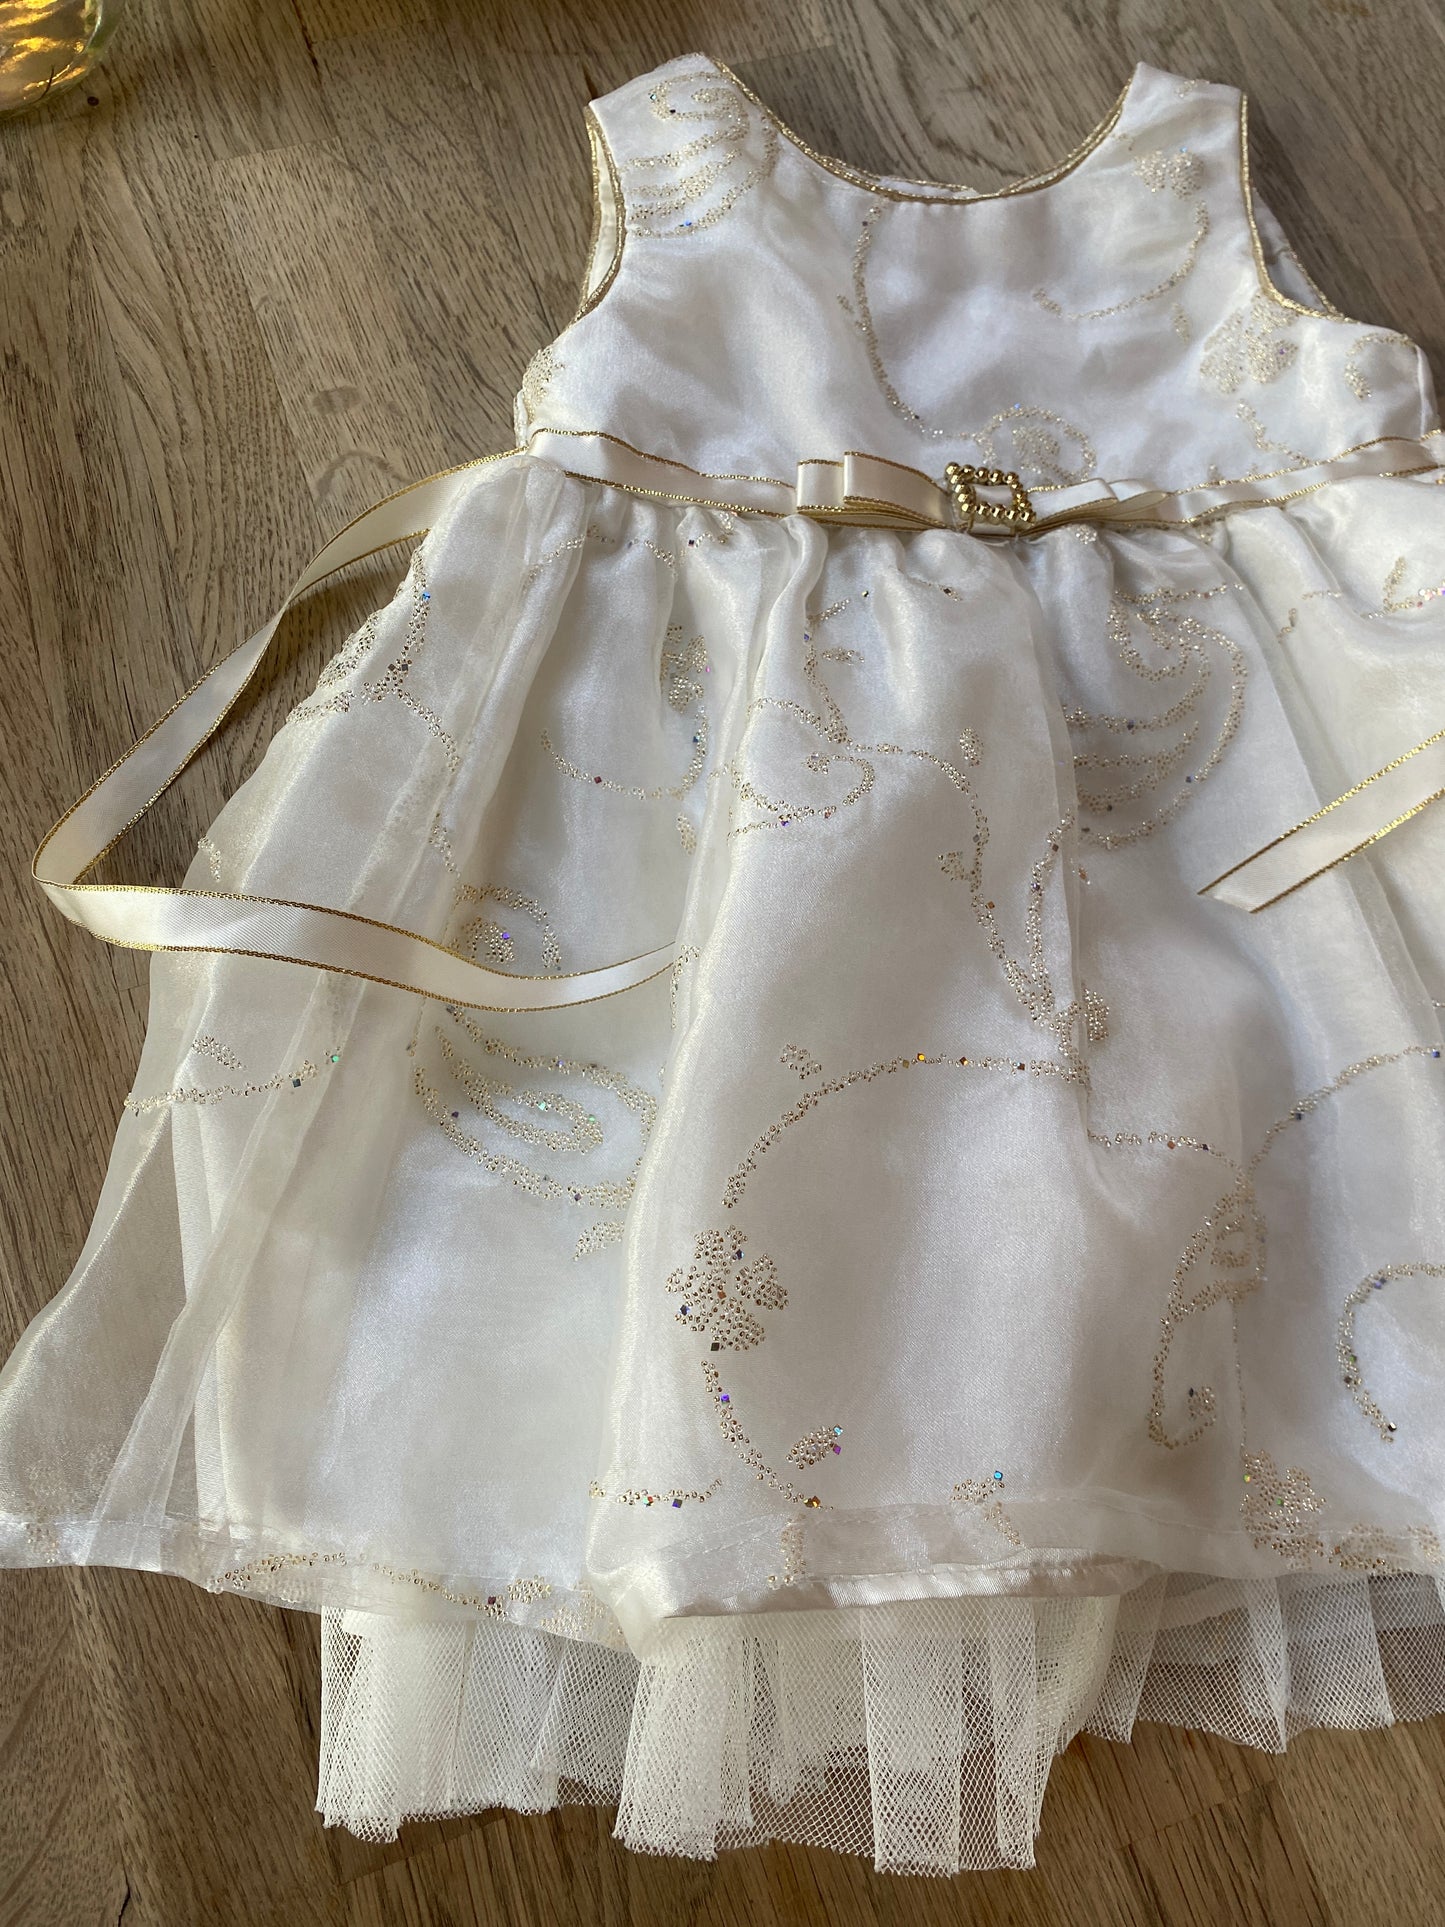 White Sparkle Dress (Pre-Loved) Size 24 Months